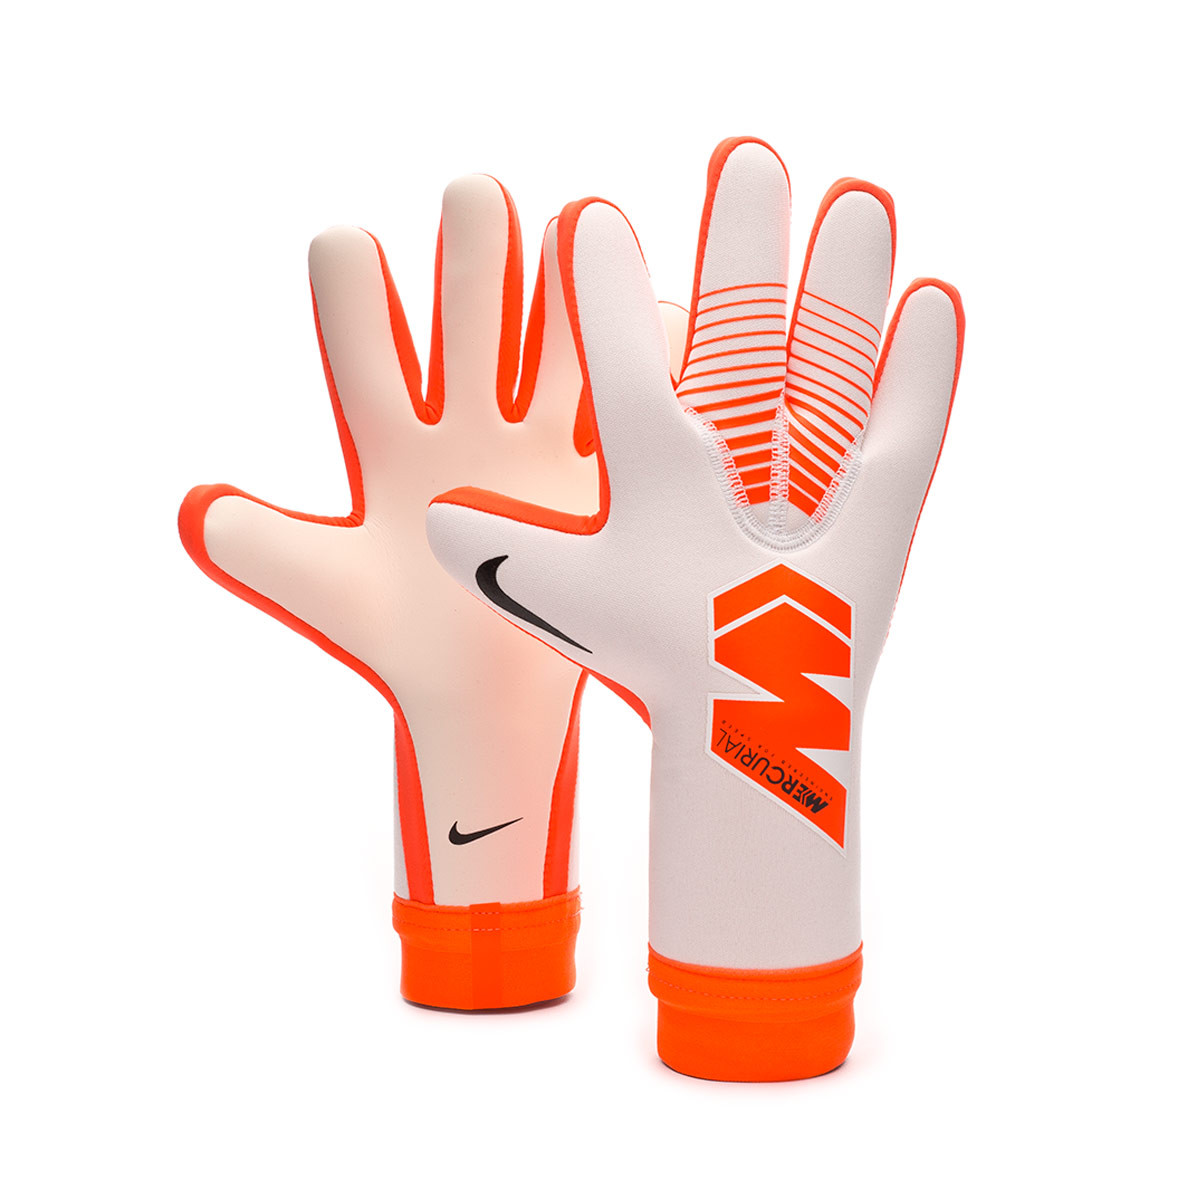 nike pro mercurial goalkeeper touch victory gloves